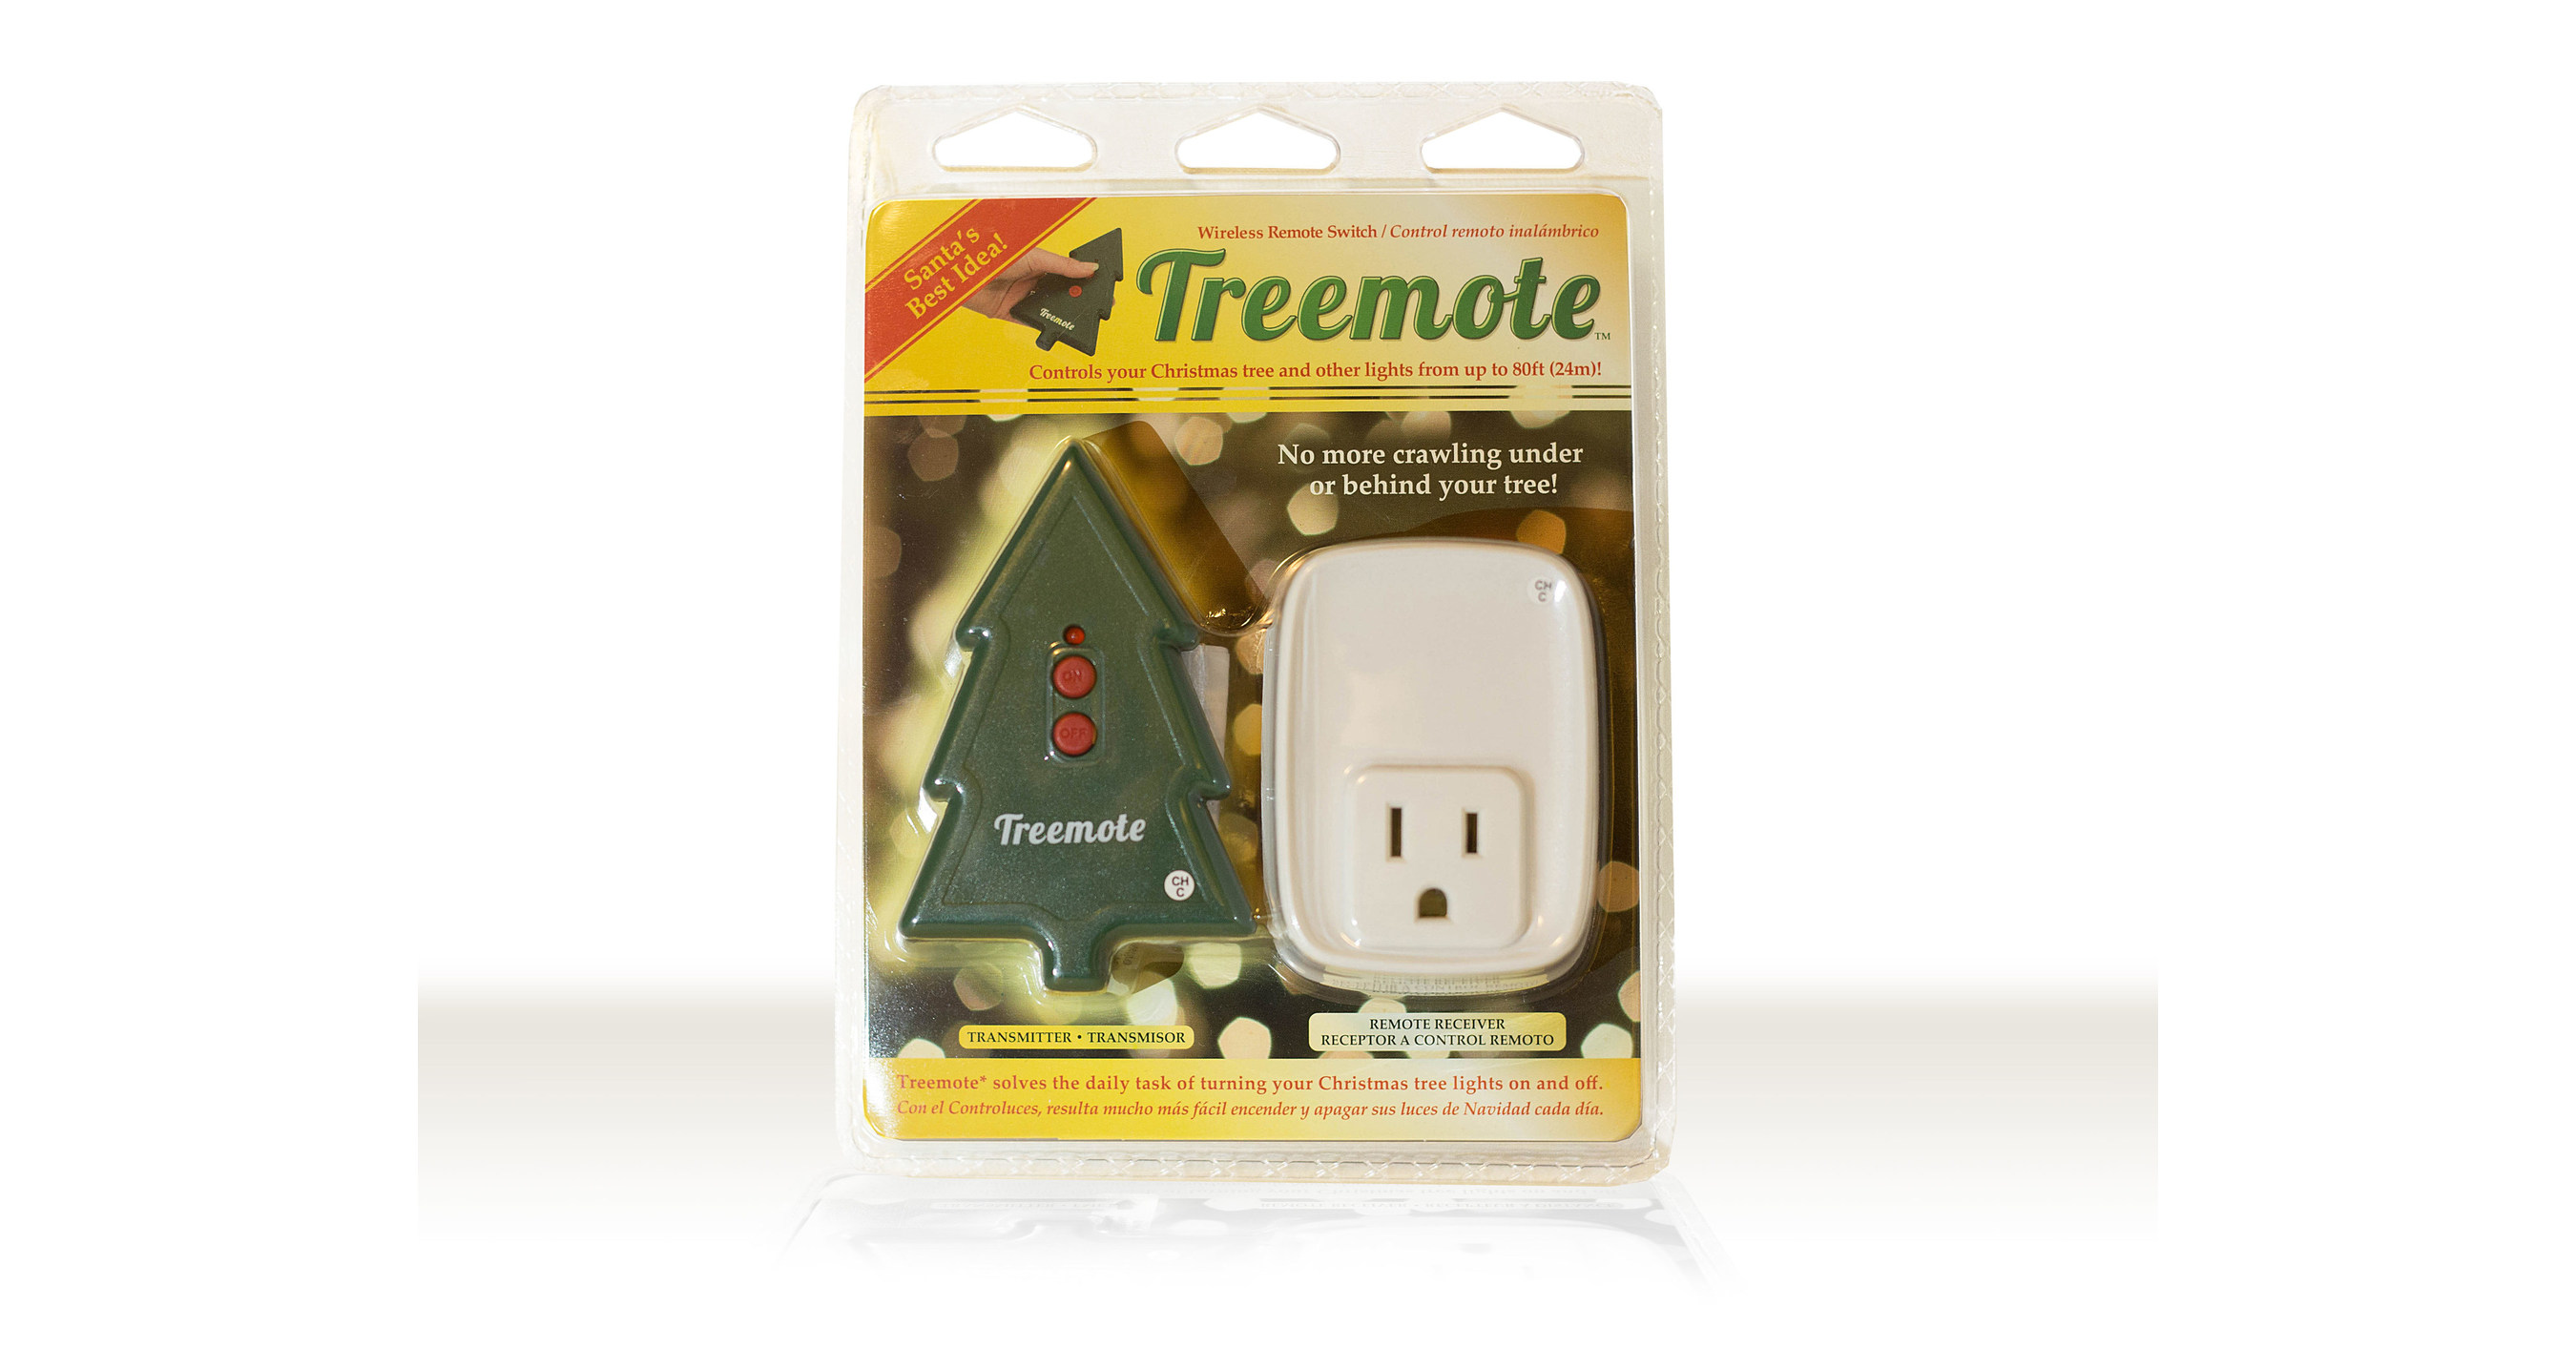 Christmas just got a lot easier as Treemote™ makes its U.S. debut